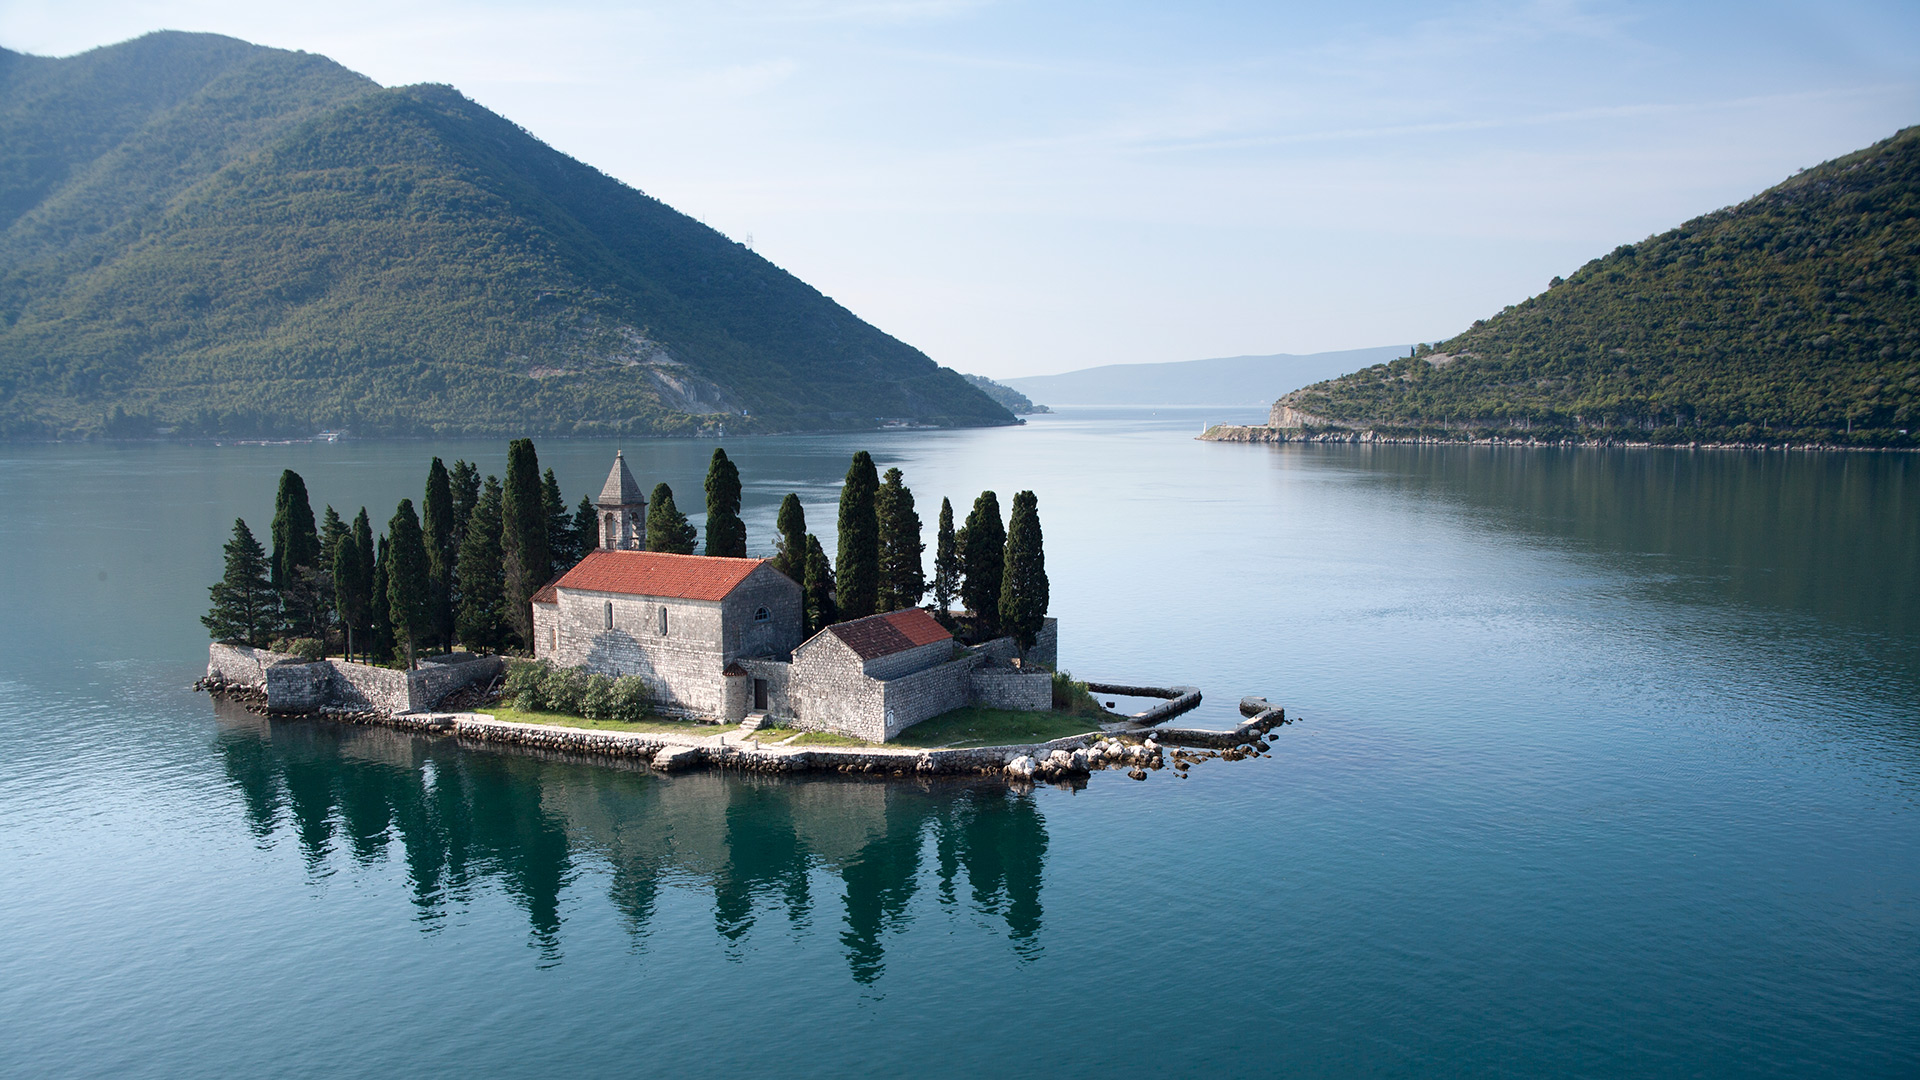 Sveti Đorđe - island of St. George, opposite Perast, Montenegro - Montenegrin waters SimpleSail sailing routes